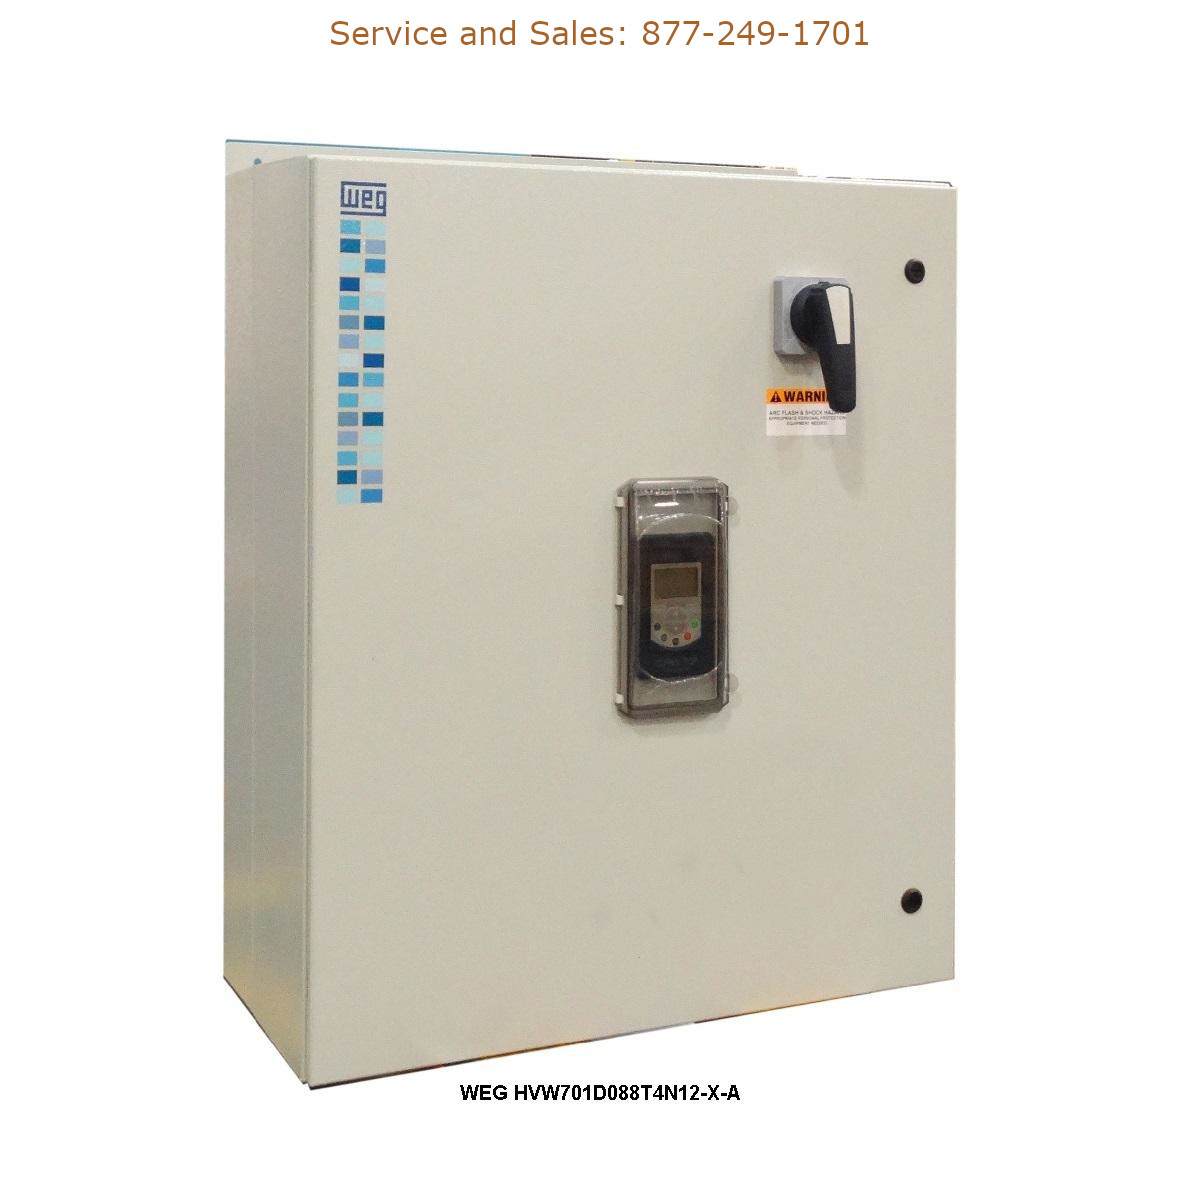 WEG HVW701D088T4N12-X-A WEG Model Number HVW701D088T4N12-X-A WEG Drives, Variable Speed Drives Repair Service, Troubleshooting, Replacement Parts https://gesrepair.com/wp-content/uploads/2022/WEG/WEG_HVW701D088T4N12-X-A_Drives_Variable_Speed_Drives.jpg